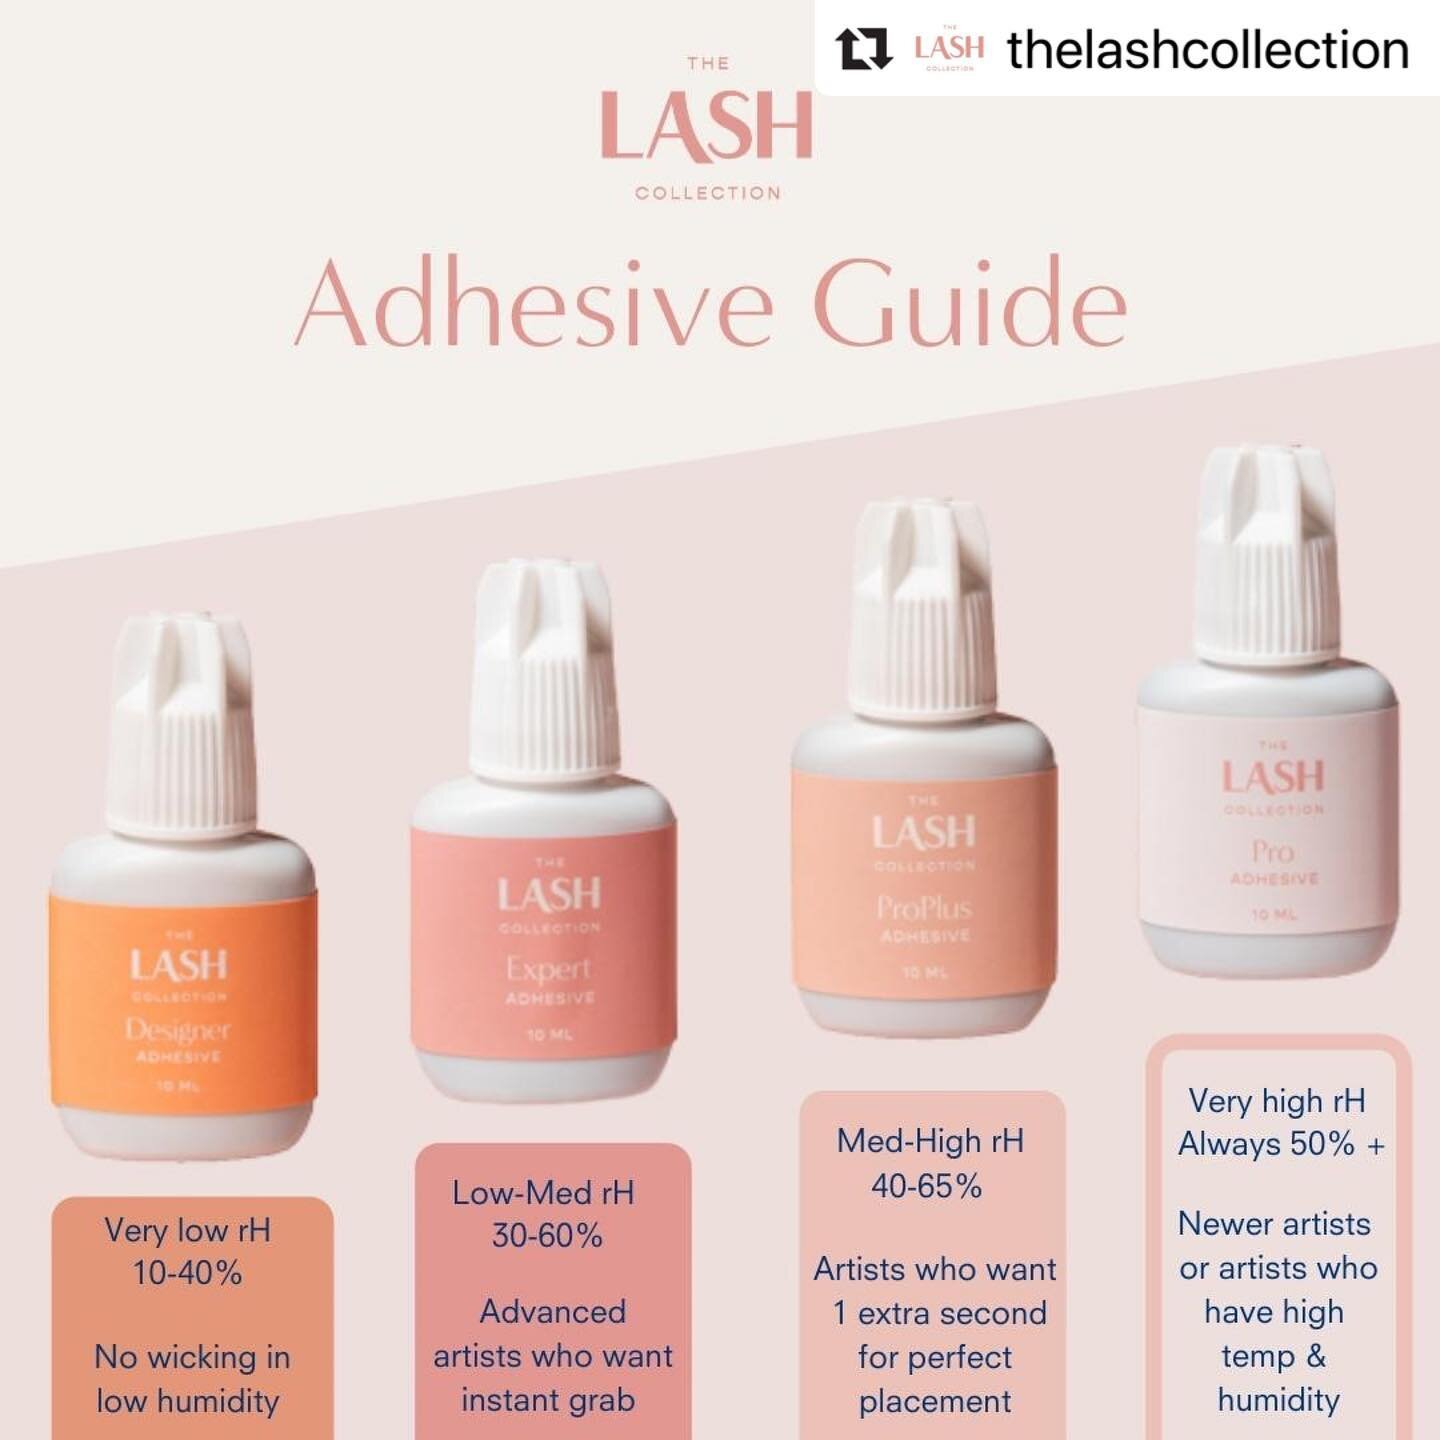 #Repost @thelashcollection with @make_repost
・・・
Which adhesive is best for me?⁠
We are happy to give a personalized recommendation, but here's our handy guide to know at a glance which of our high-performance formulas is best for you.⁠
🖤⁠
🖤⁠
🖤⁠
#